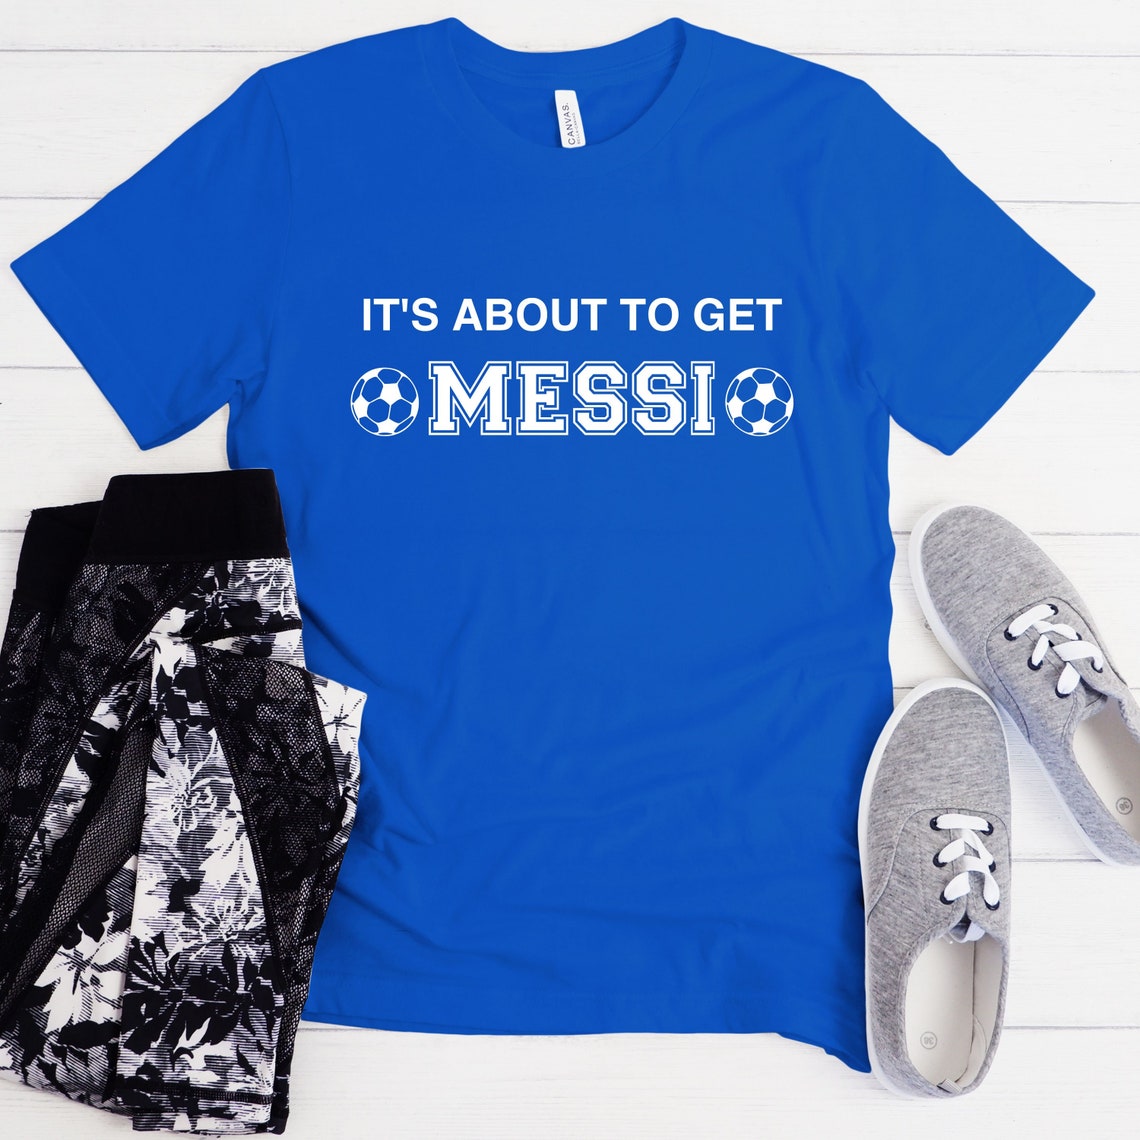 It's About to Get Messi T-shirt